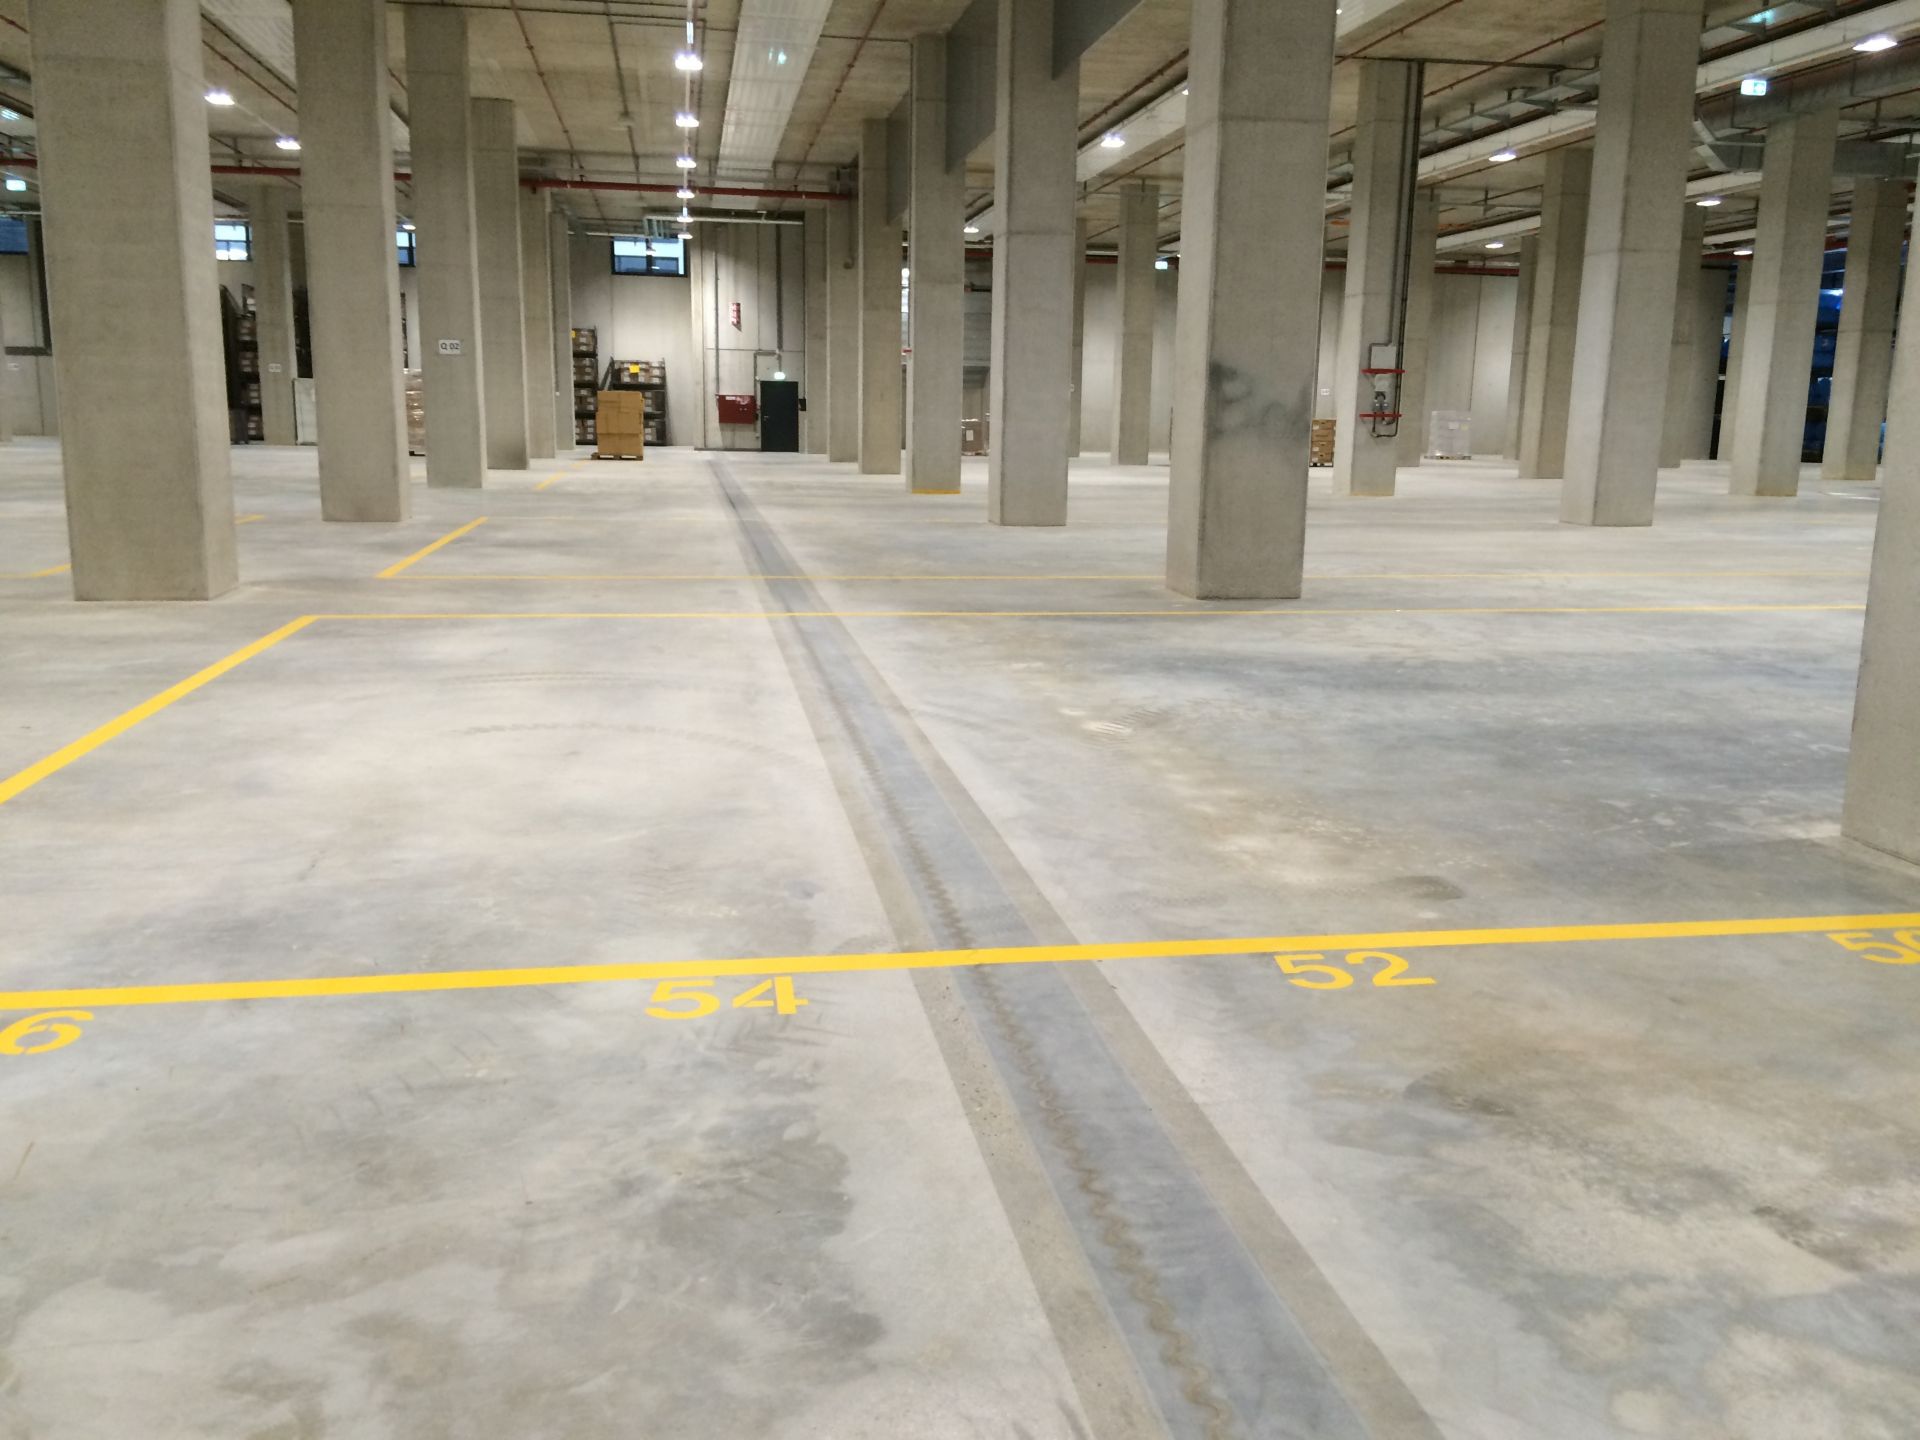 How To Design An Ideal Floor For Warehouse And Logistics Facilities